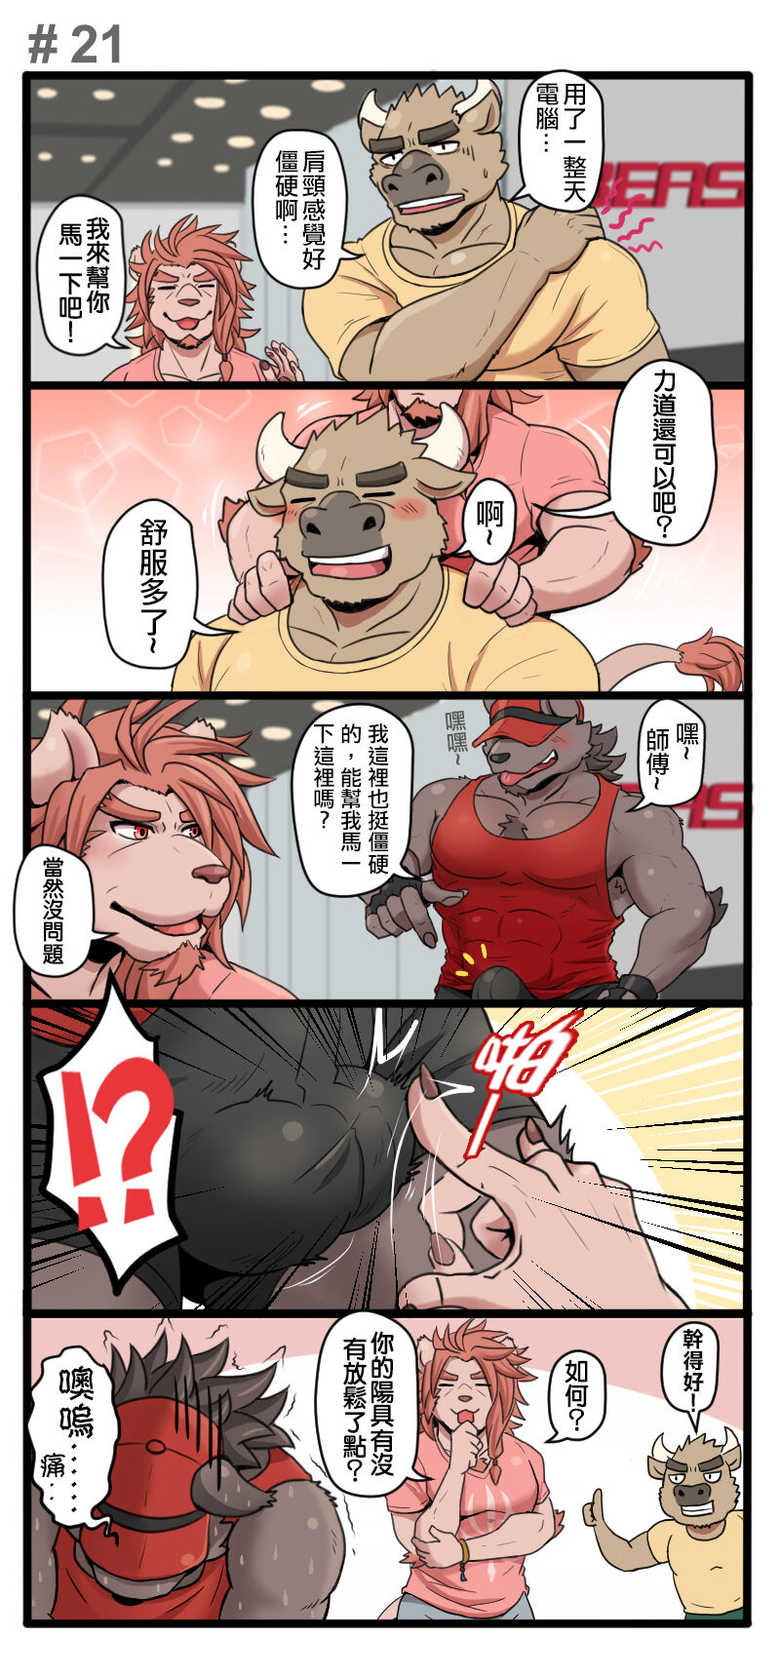 [Ripple Moon (漣漪月影)] Gym Pals - Pal and his gym pals' gaily daily life [Chinese] (ongoing) - Page 22